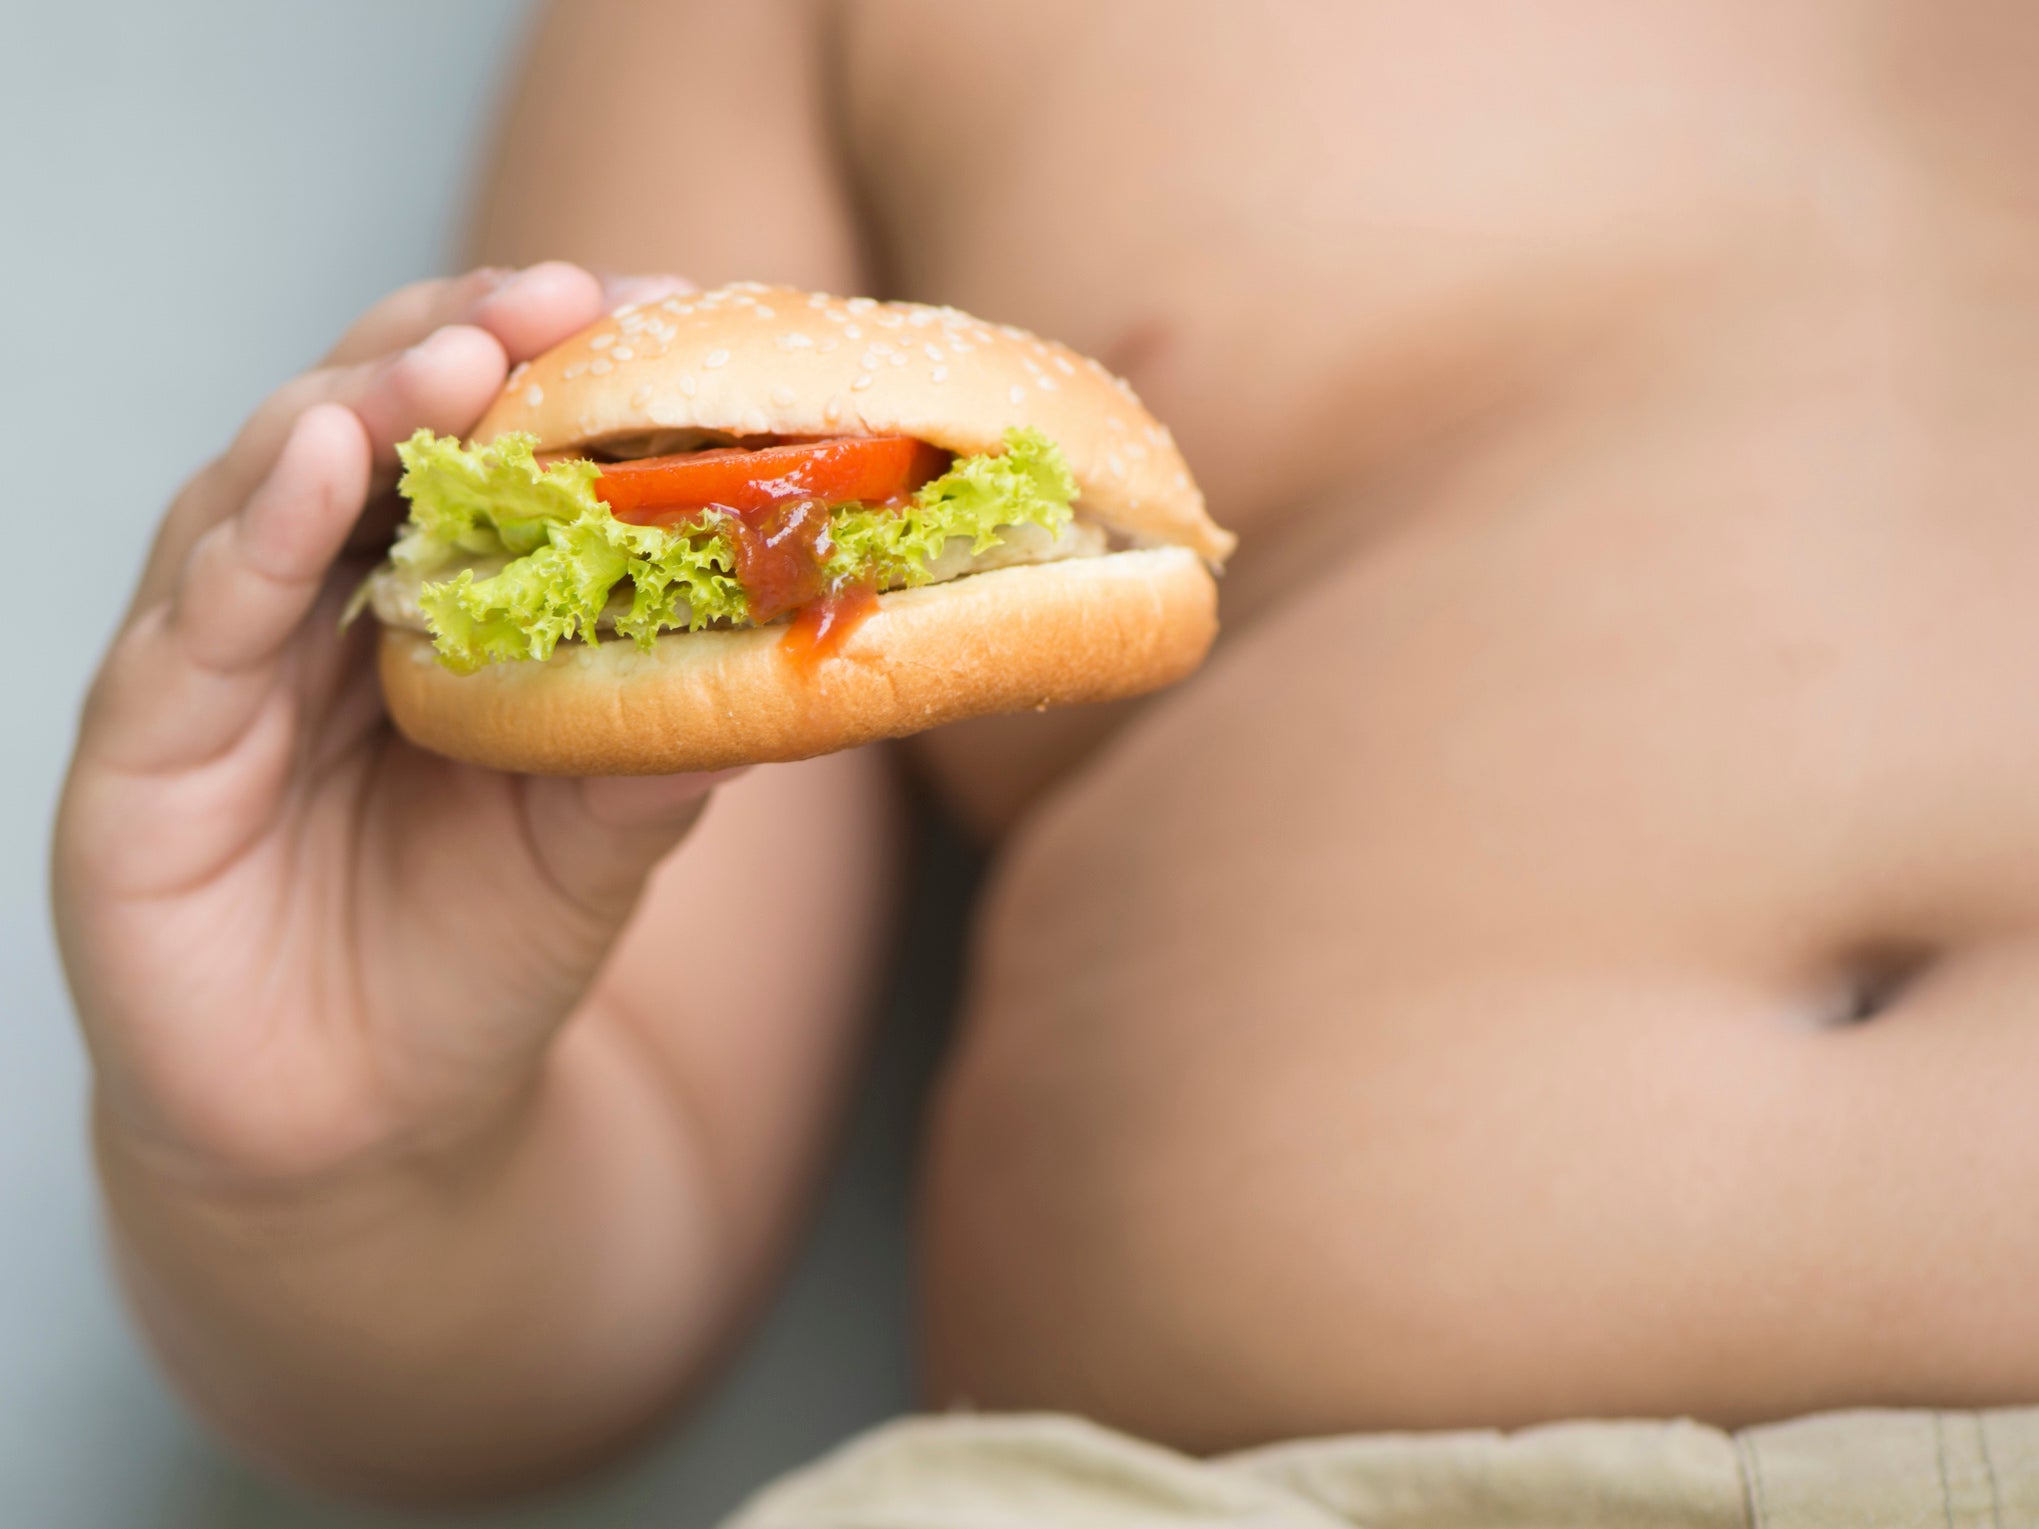 One in five children entering primary school are either overweight or obese